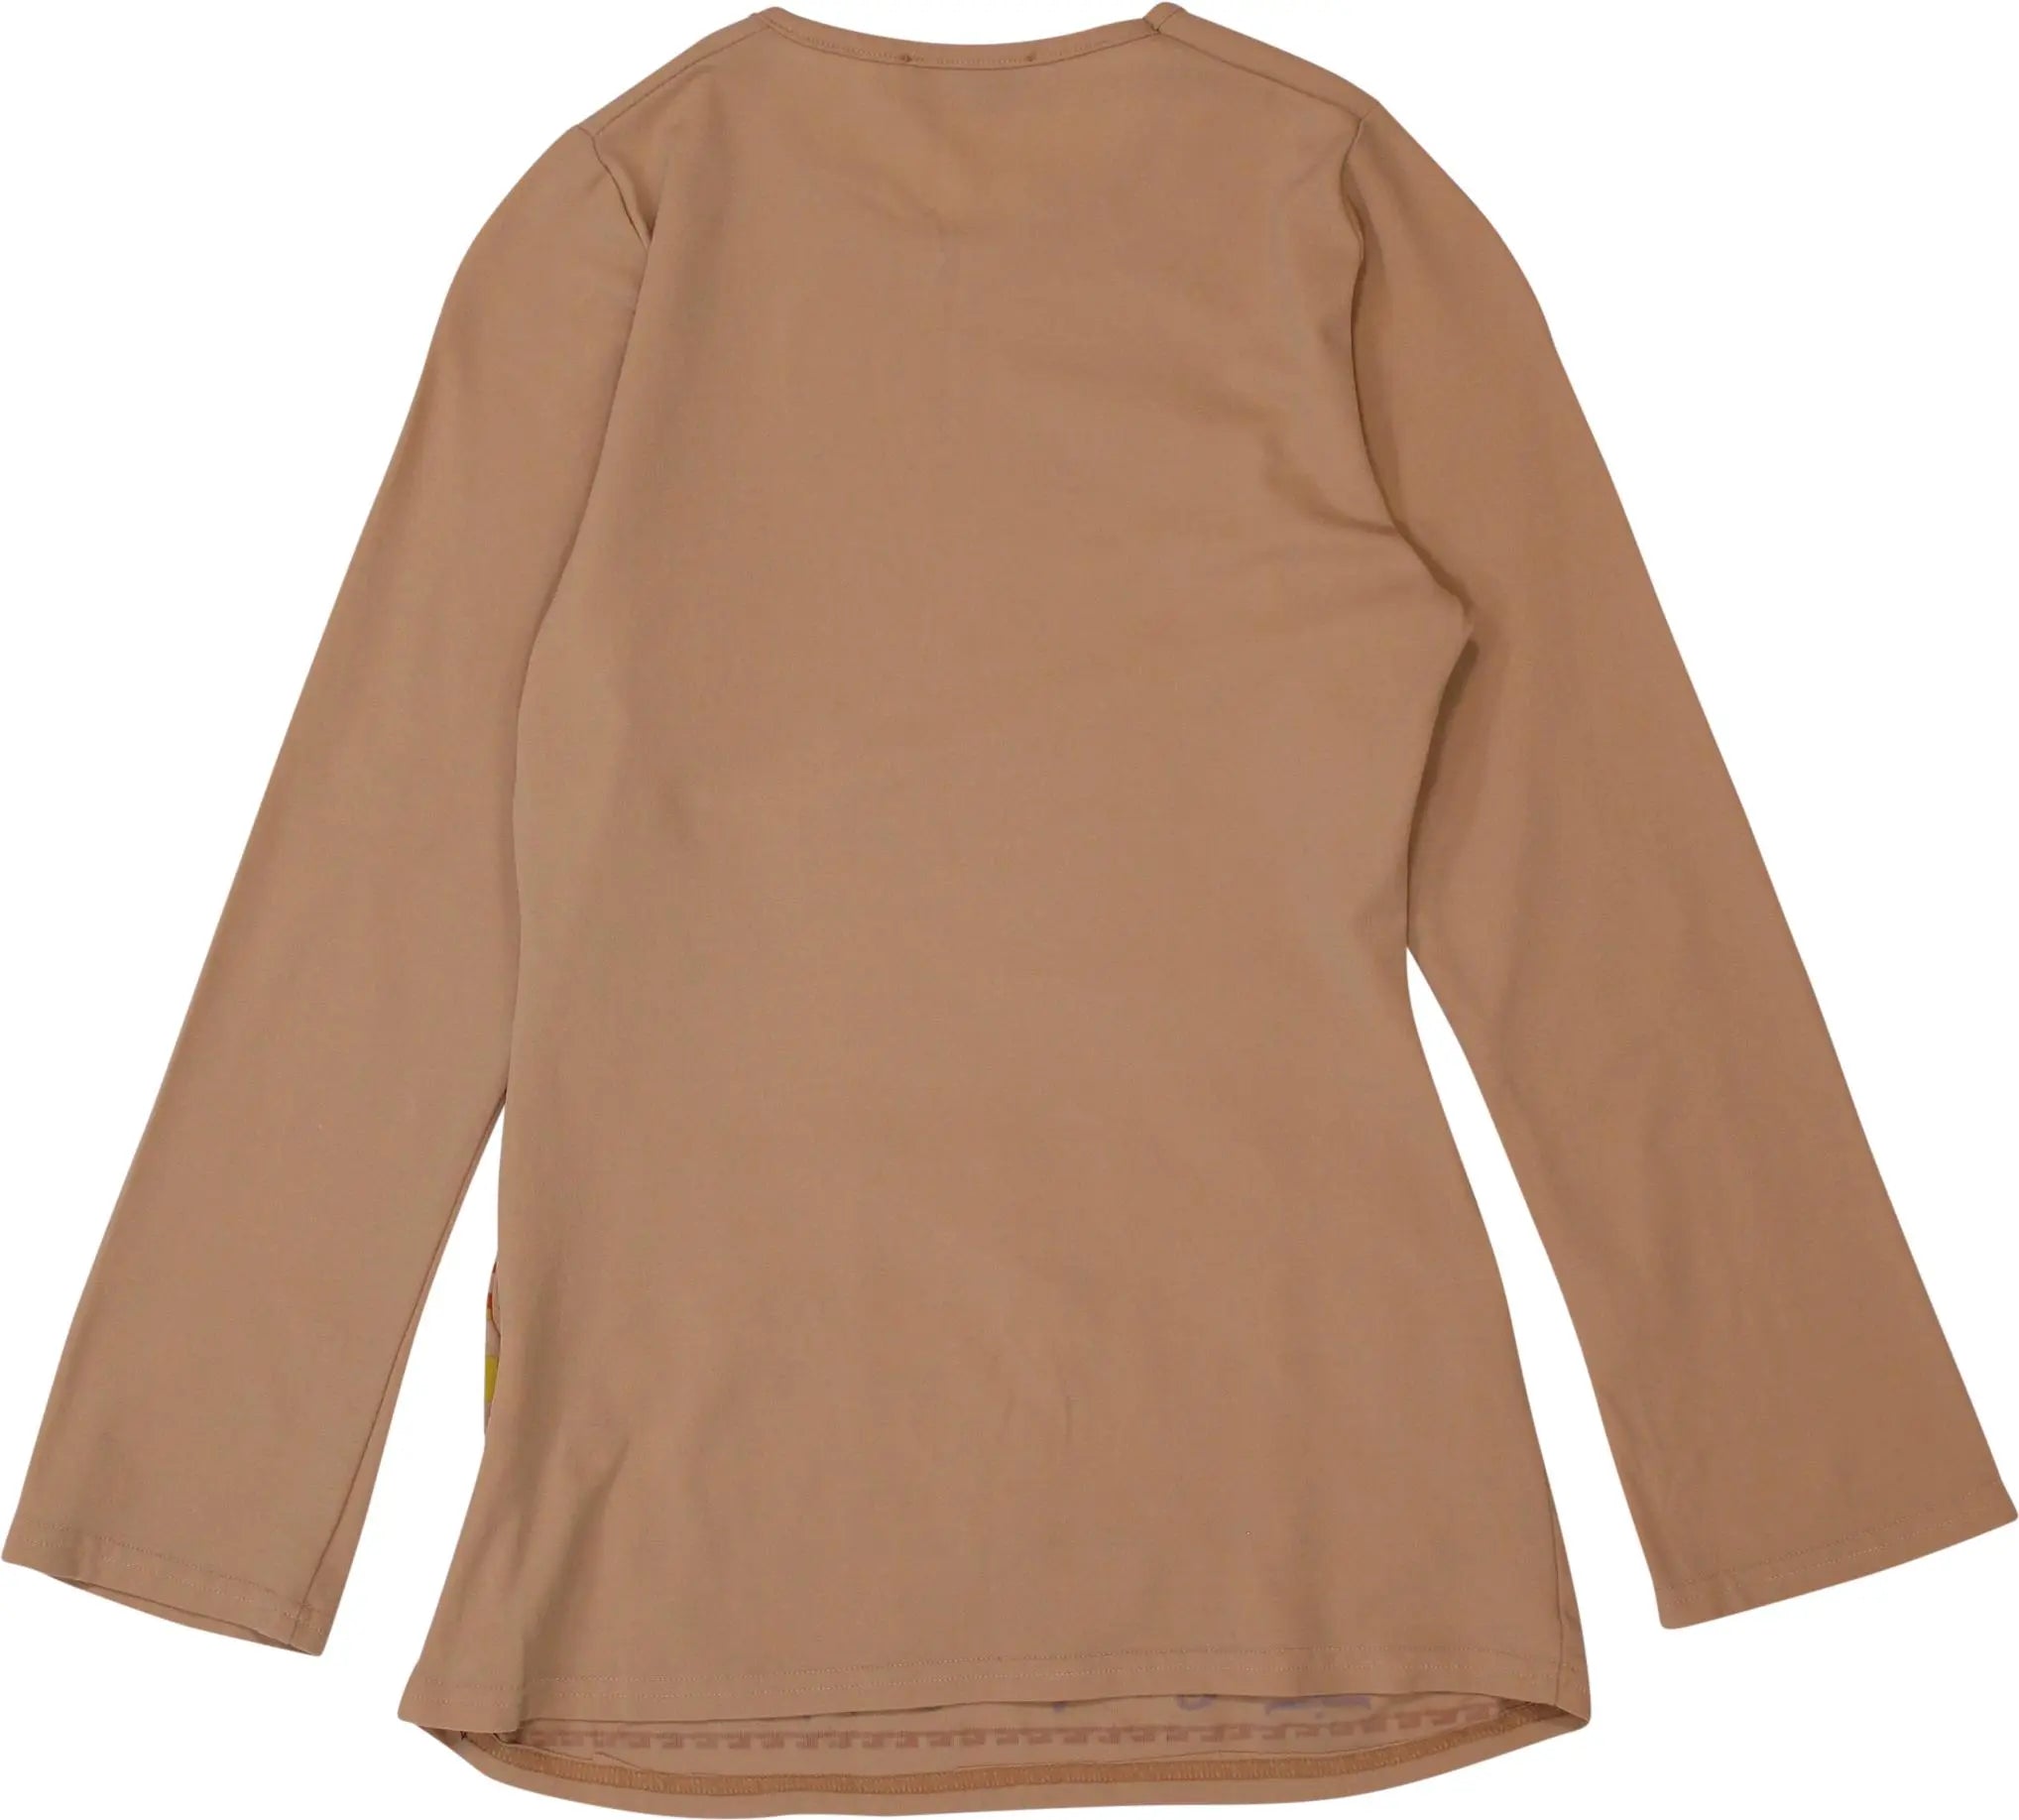 Nana Baïla - Beige Long Sleeve Top with Graphic- ThriftTale.com - Vintage and second handclothing